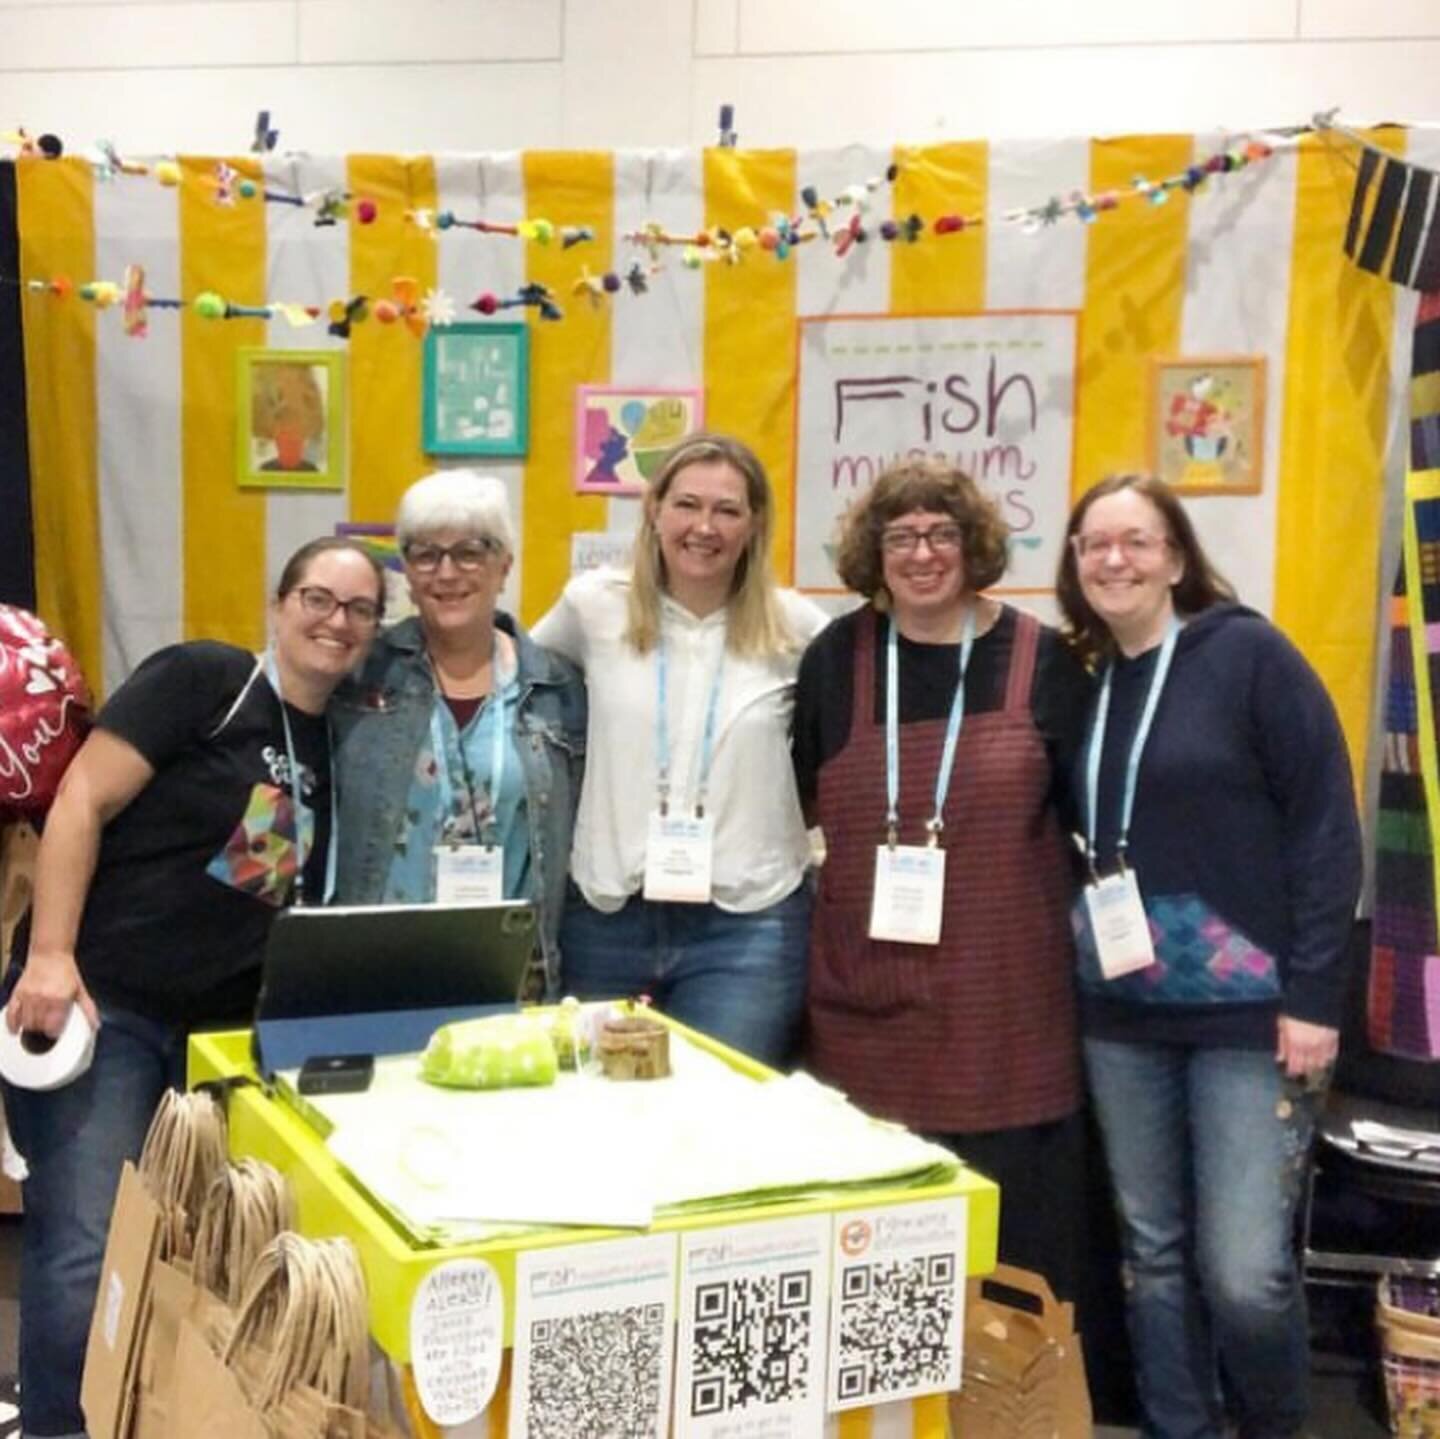 So much fun was had at QuiltCon!!! I was sad to leave, but not too sad, because boy was it tiring fun!  Was great to see quilting friends old and new and very dear!! Thanks for letting me crew your booth @fishmuseum and walk the aisles with you, @lei